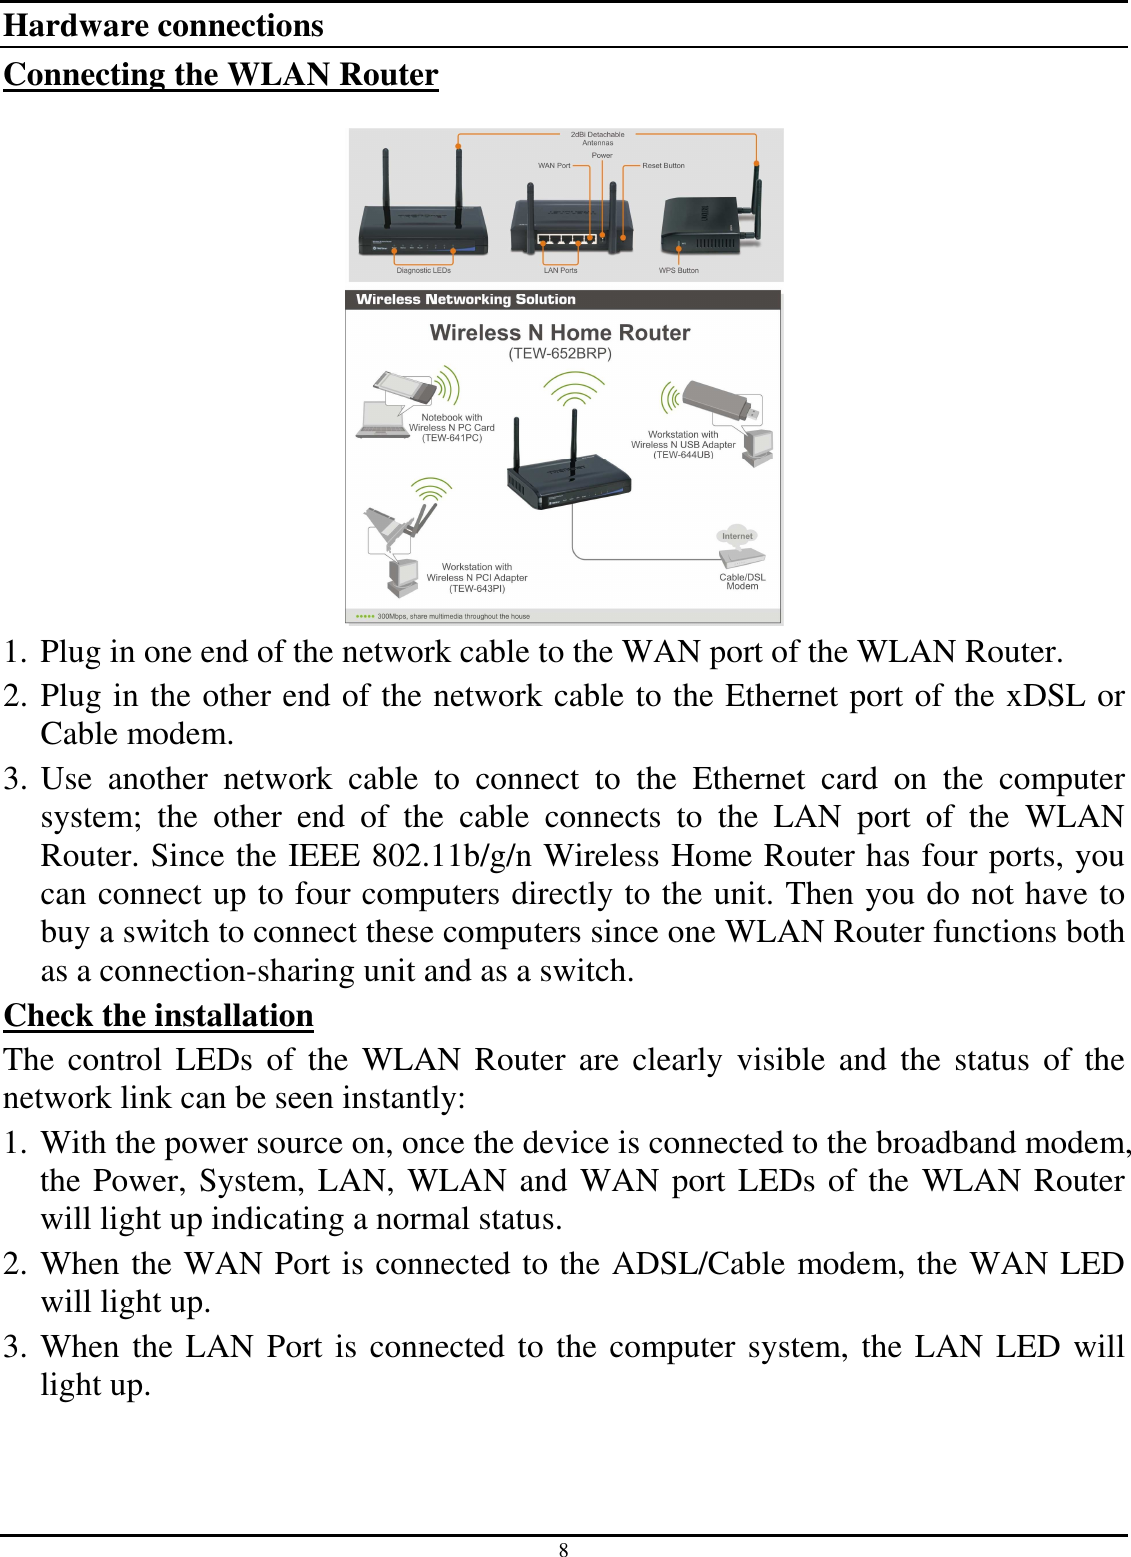 8 Hardware connections Connecting the WLAN Router   1. Plug in one end of the network cable to the WAN port of the WLAN Router. 2. Plug in the other end of the network cable to the Ethernet port of the xDSL or Cable modem. 3. Use  another  network  cable  to  connect  to  the  Ethernet  card  on  the  computer system;  the  other  end  of  the  cable  connects  to  the  LAN  port  of  the  WLAN Router. Since the IEEE 802.11b/g/n Wireless Home Router has four ports, you can connect up to four computers directly to the unit. Then you do not have to buy a switch to connect these computers since one WLAN Router functions both as a connection-sharing unit and as a switch. Check the installation The  control LEDs  of  the  WLAN  Router  are  clearly  visible  and  the  status  of the network link can be seen instantly: 1. With the power source on, once the device is connected to the broadband modem, the Power, System, LAN, WLAN and WAN port LEDs of the WLAN Router will light up indicating a normal status. 2. When the WAN Port is connected to the ADSL/Cable modem, the WAN LED will light up. 3. When the LAN Port is connected to the computer system, the LAN LED will light up. 